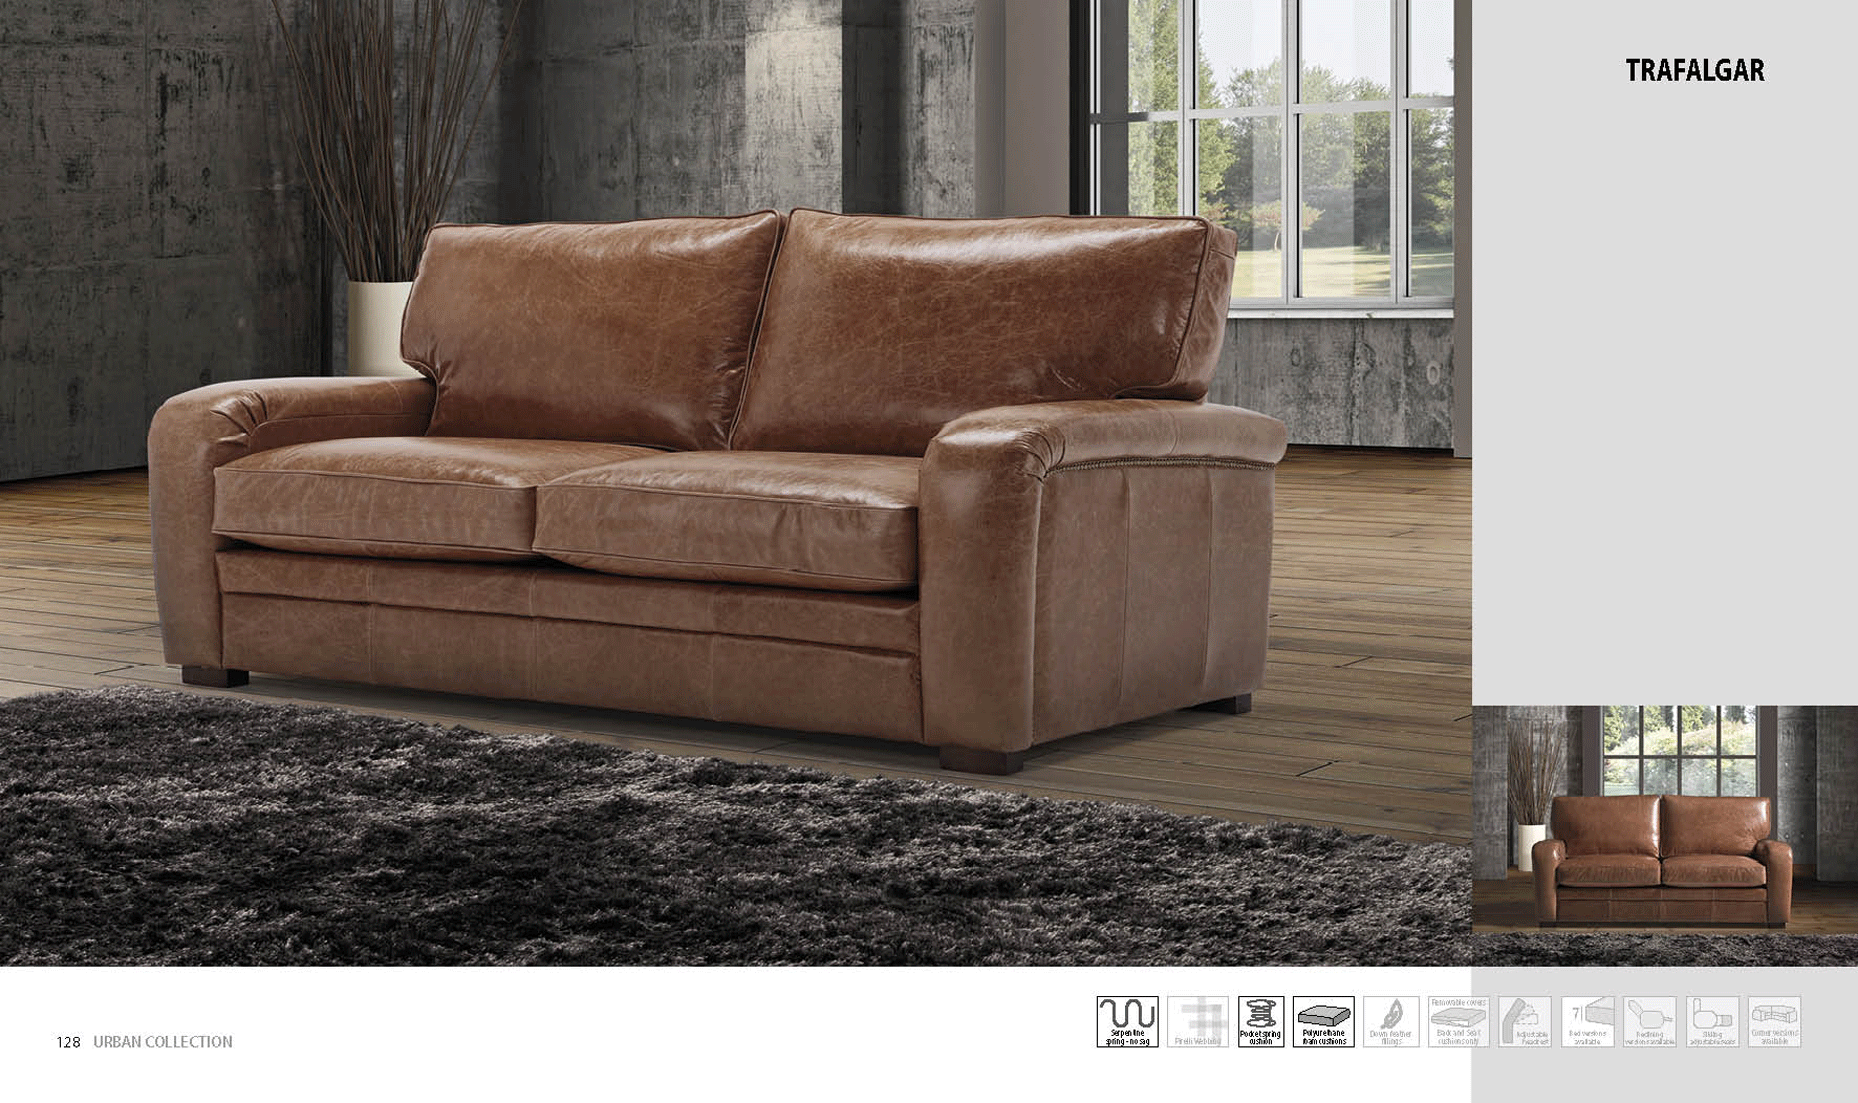 Living Room Furniture New Trend Concepts Urban Living Room Collection Trafalgar